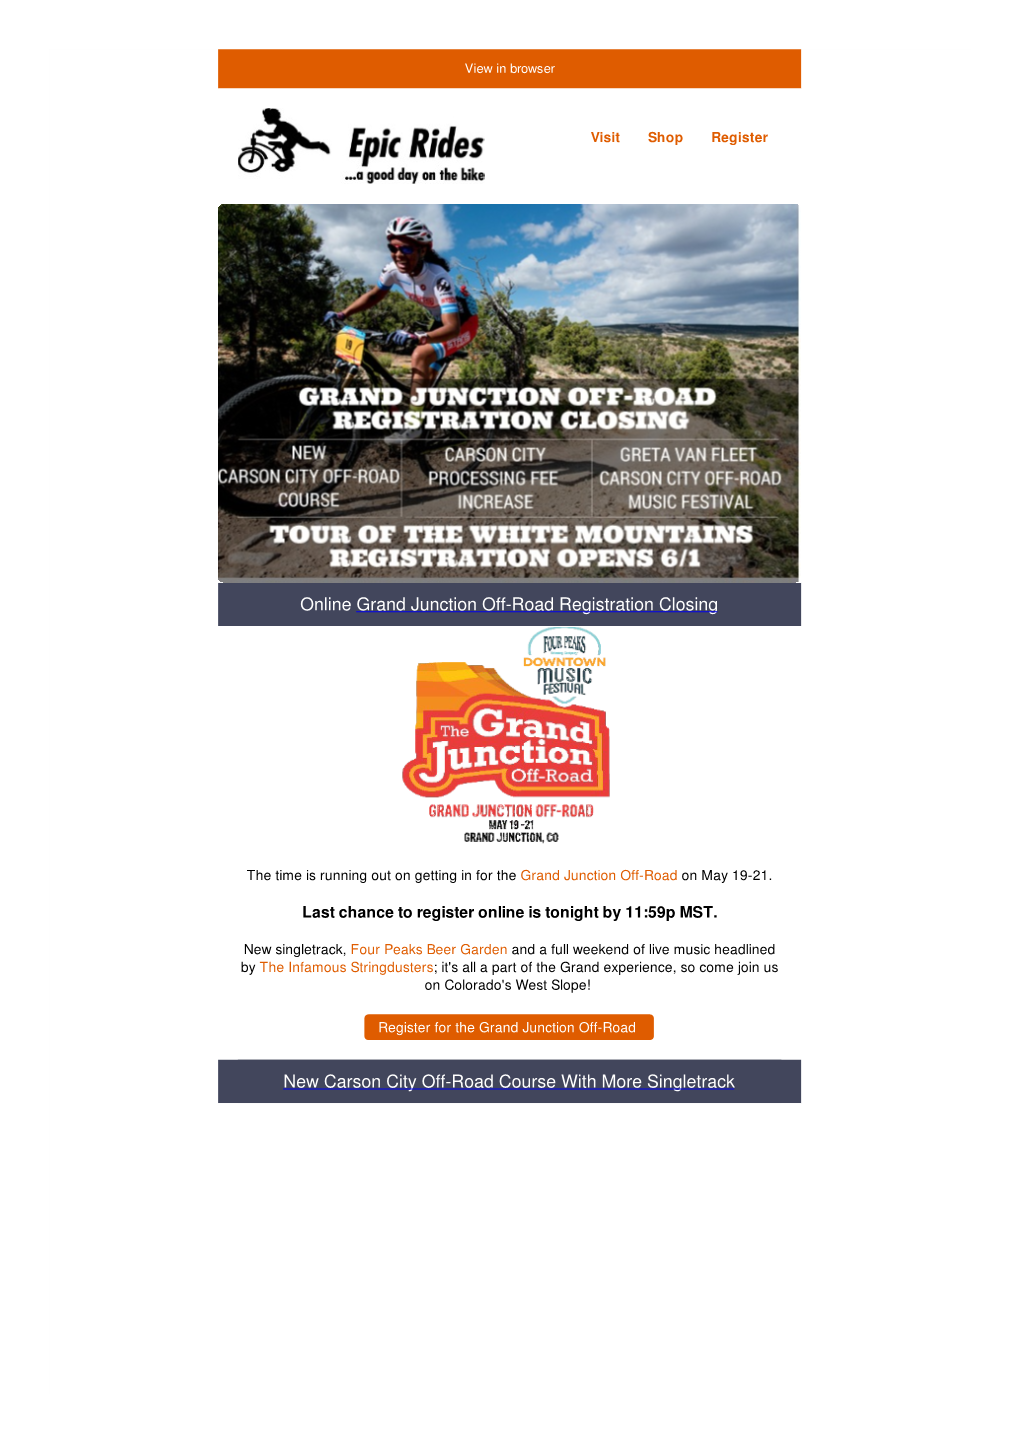 Online Grand Junction Off-Road Registration Closing New Carson